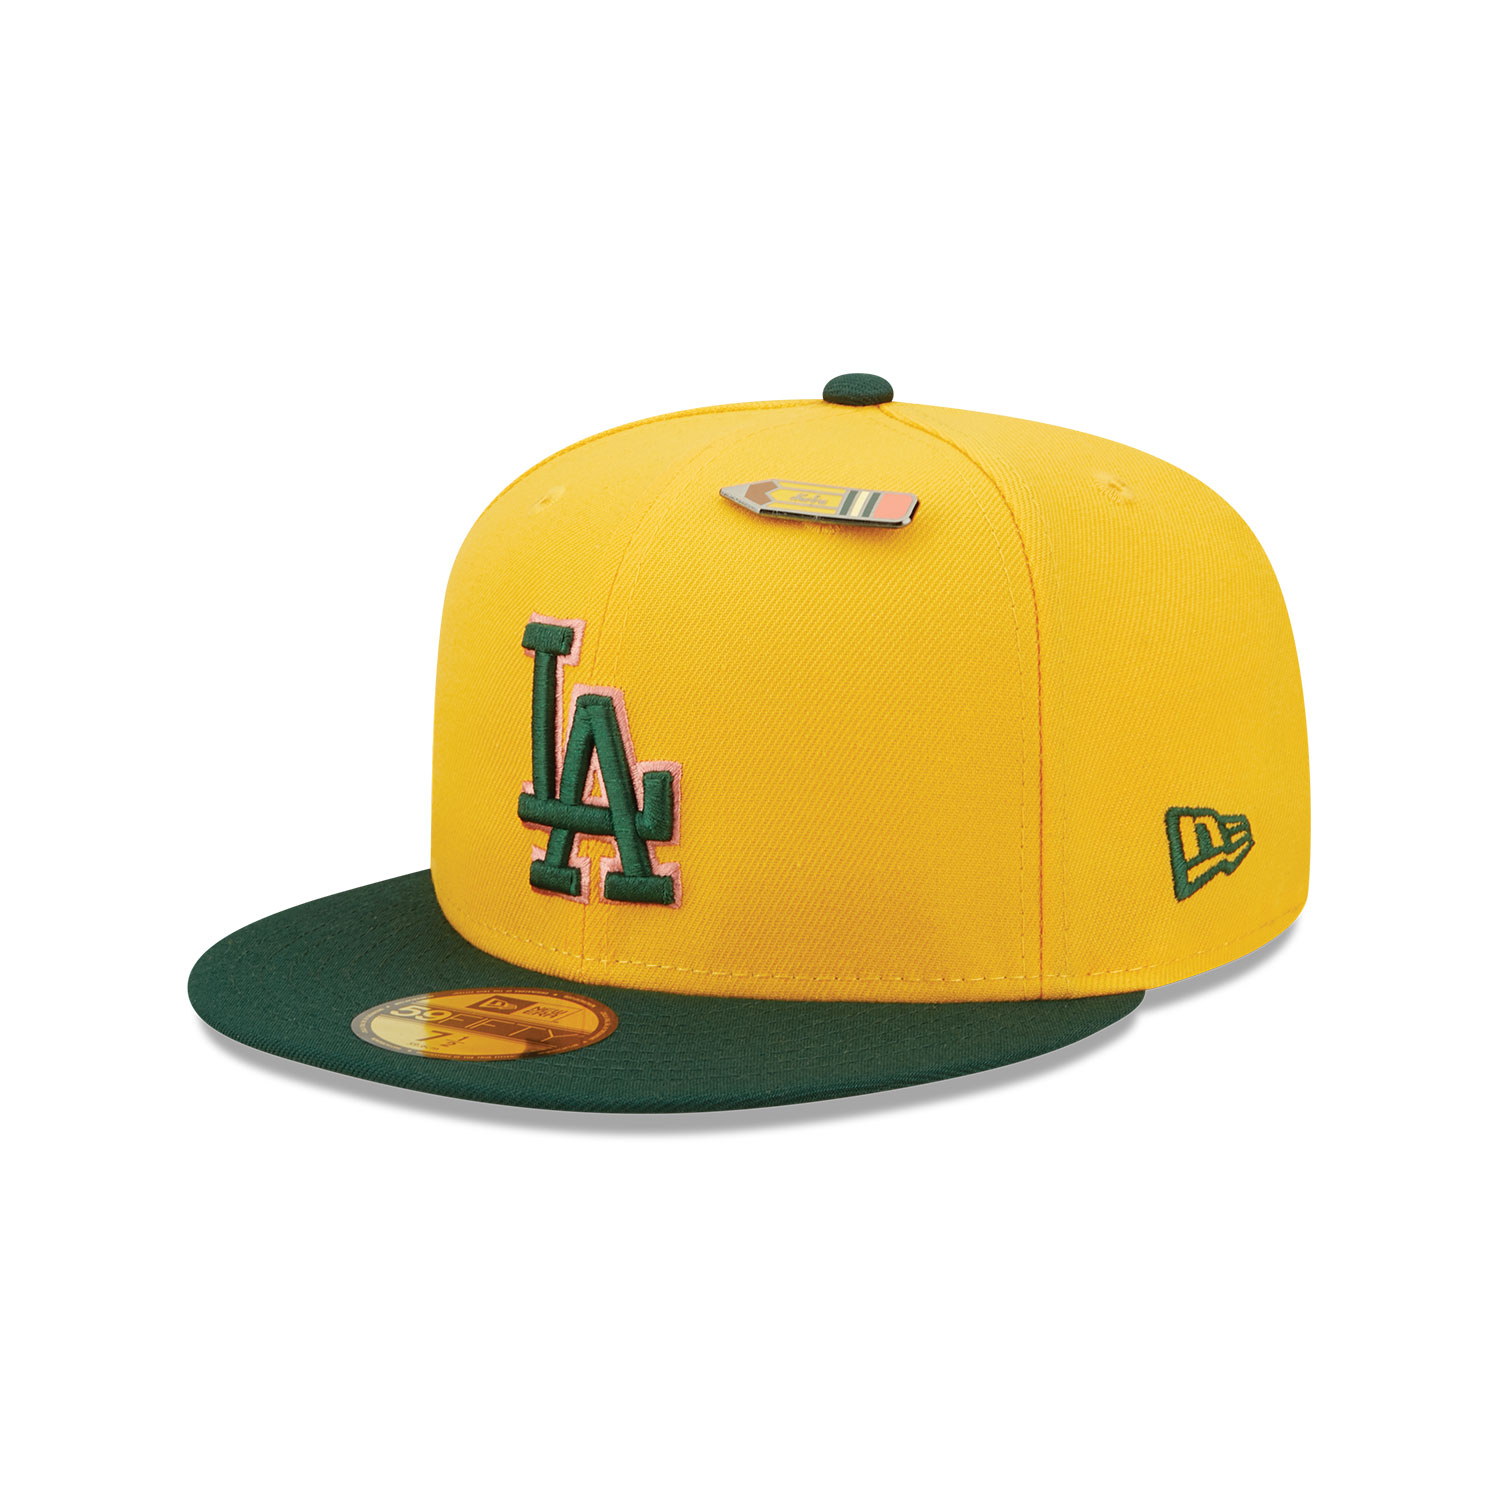 LA Dodgers Back to School Yellow 59FIFTY Fitted Cap